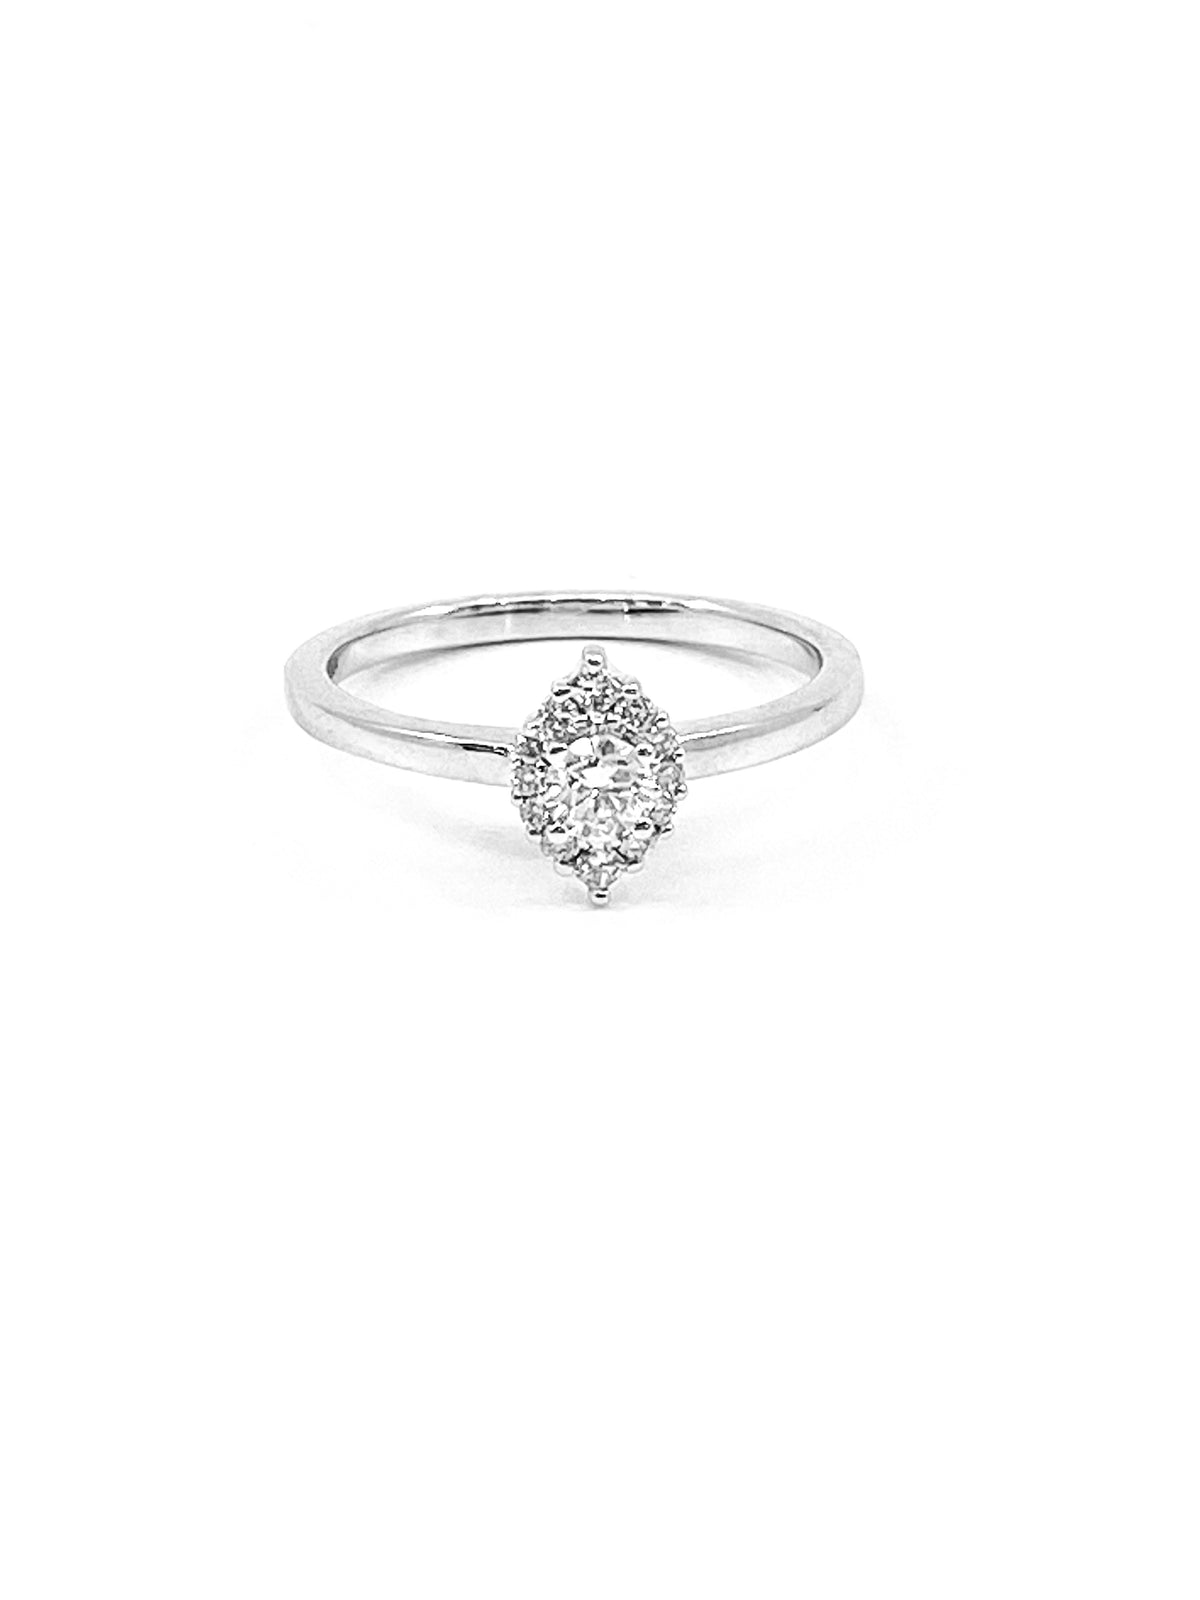 10K White Gold 0.30cttw Canadian Diamond Halo Engagement Ring, size 6.5